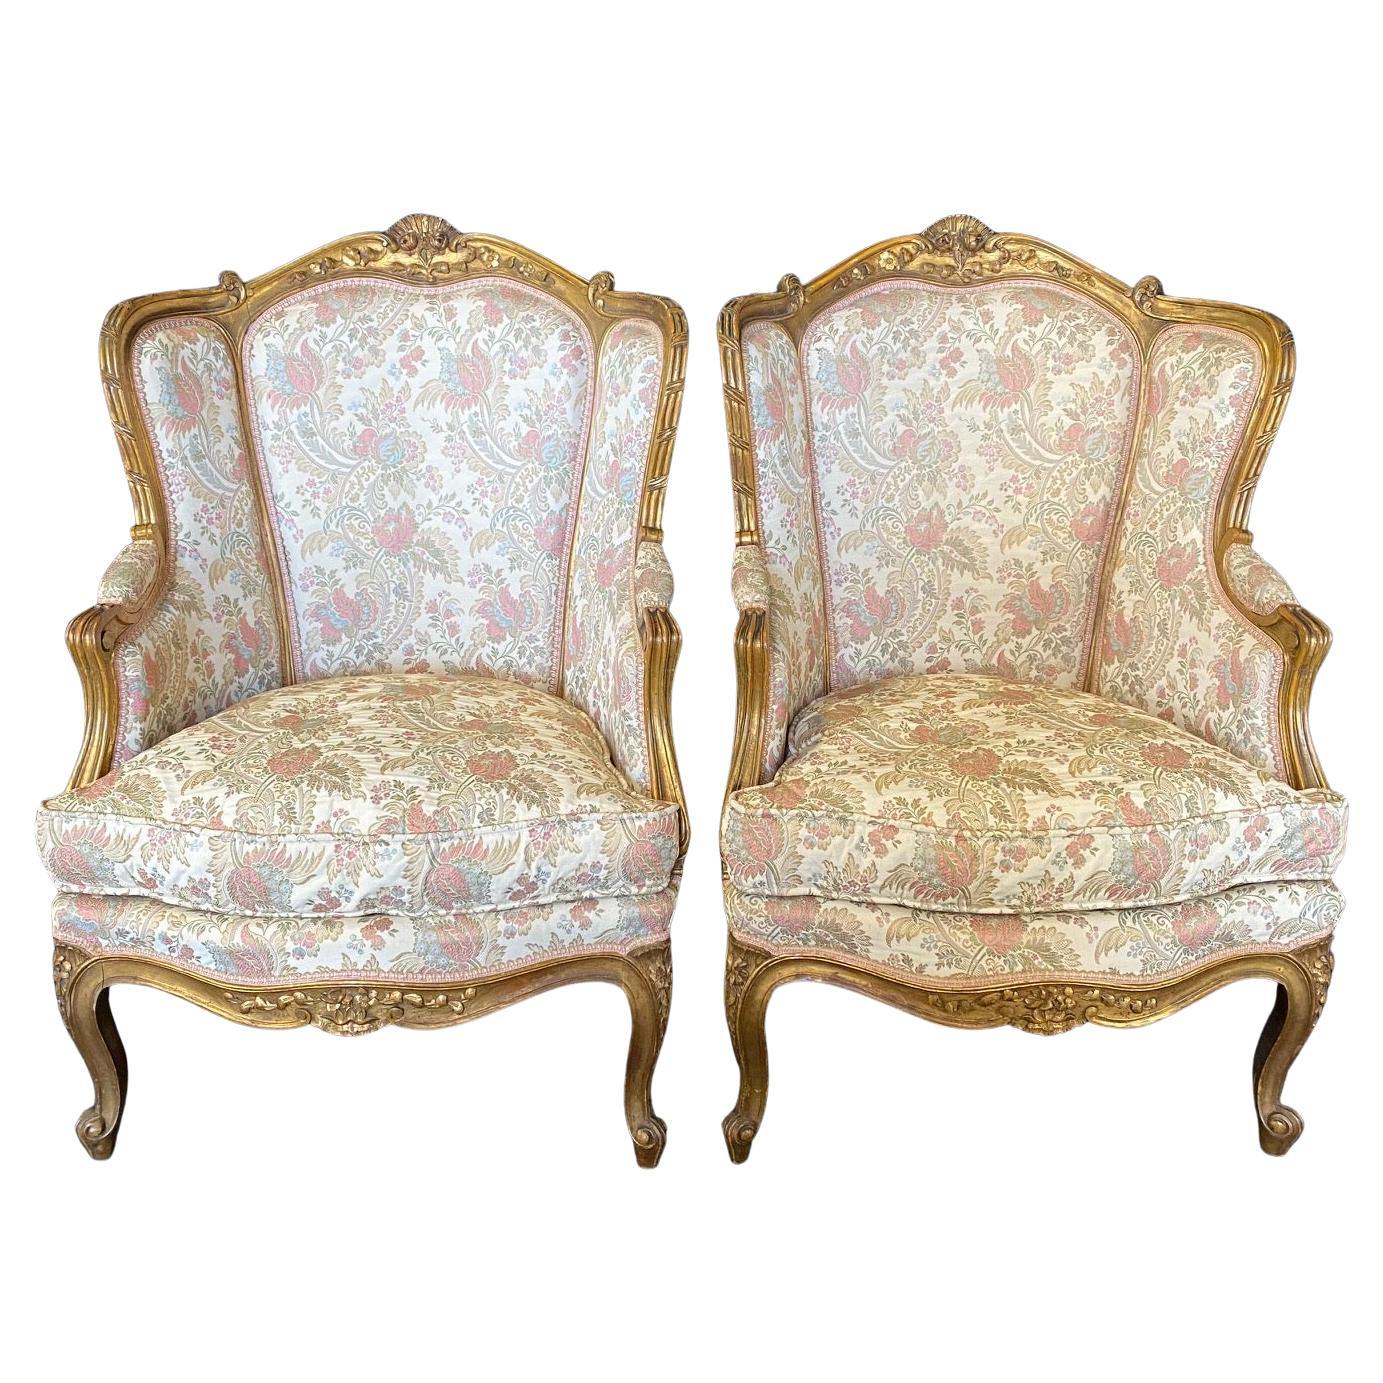 Pair of Exquisite French Louis XV Giltwood Wingback Chairs 